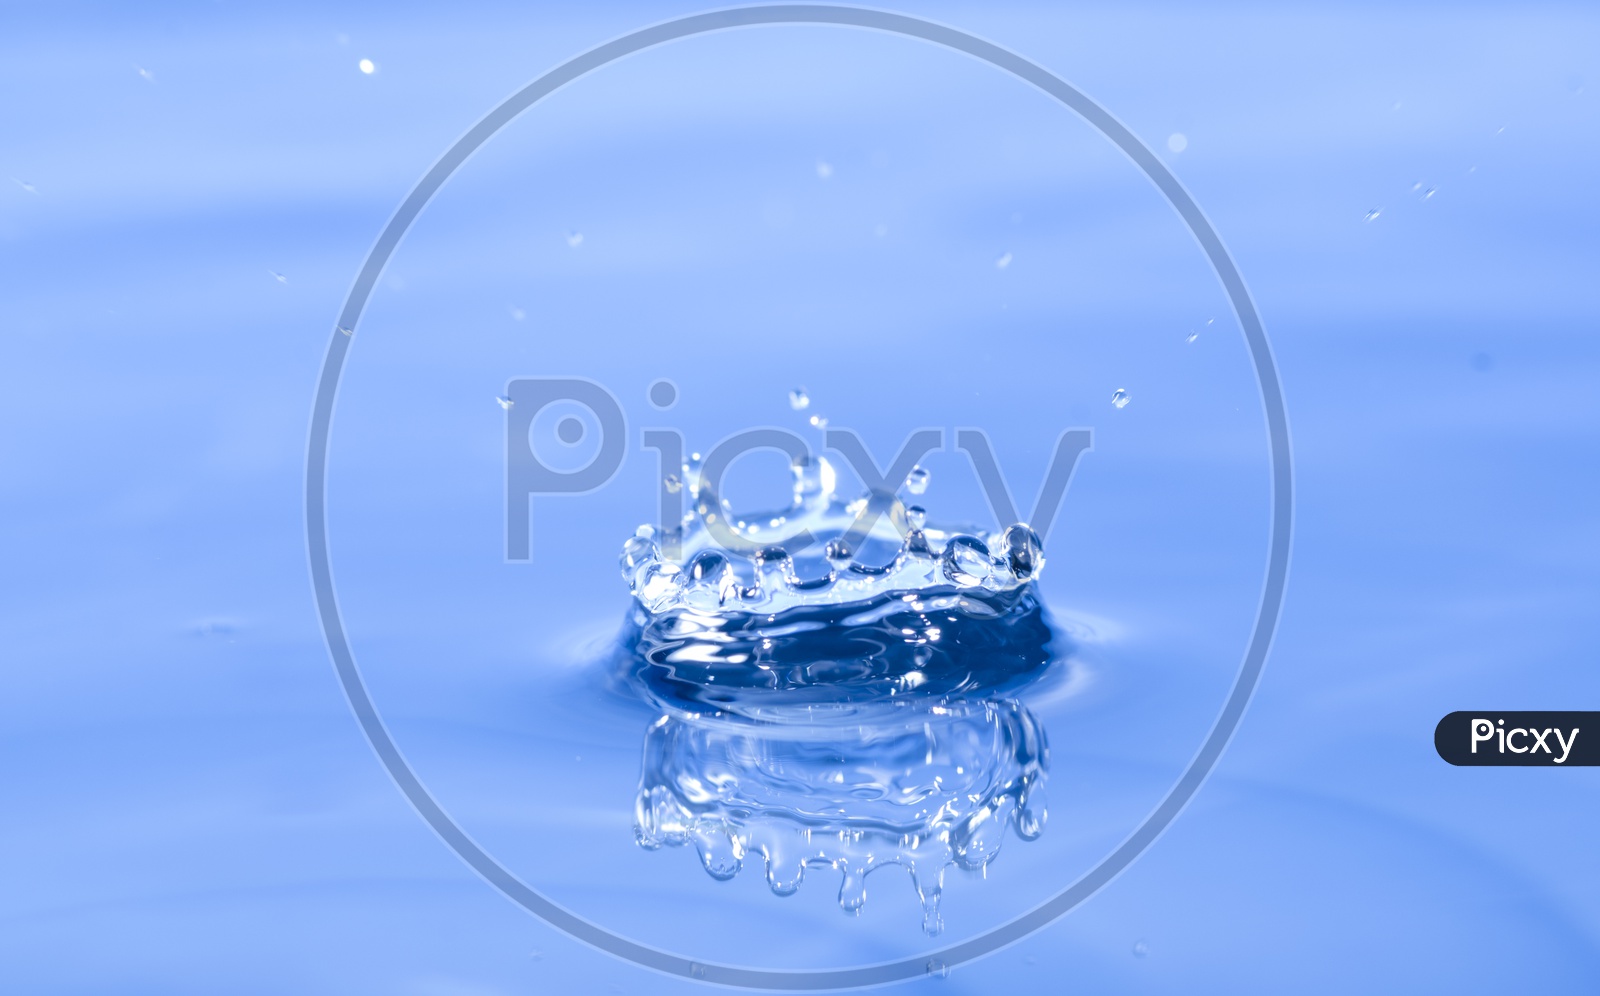 Water Splash With Droplet  On Blue surface